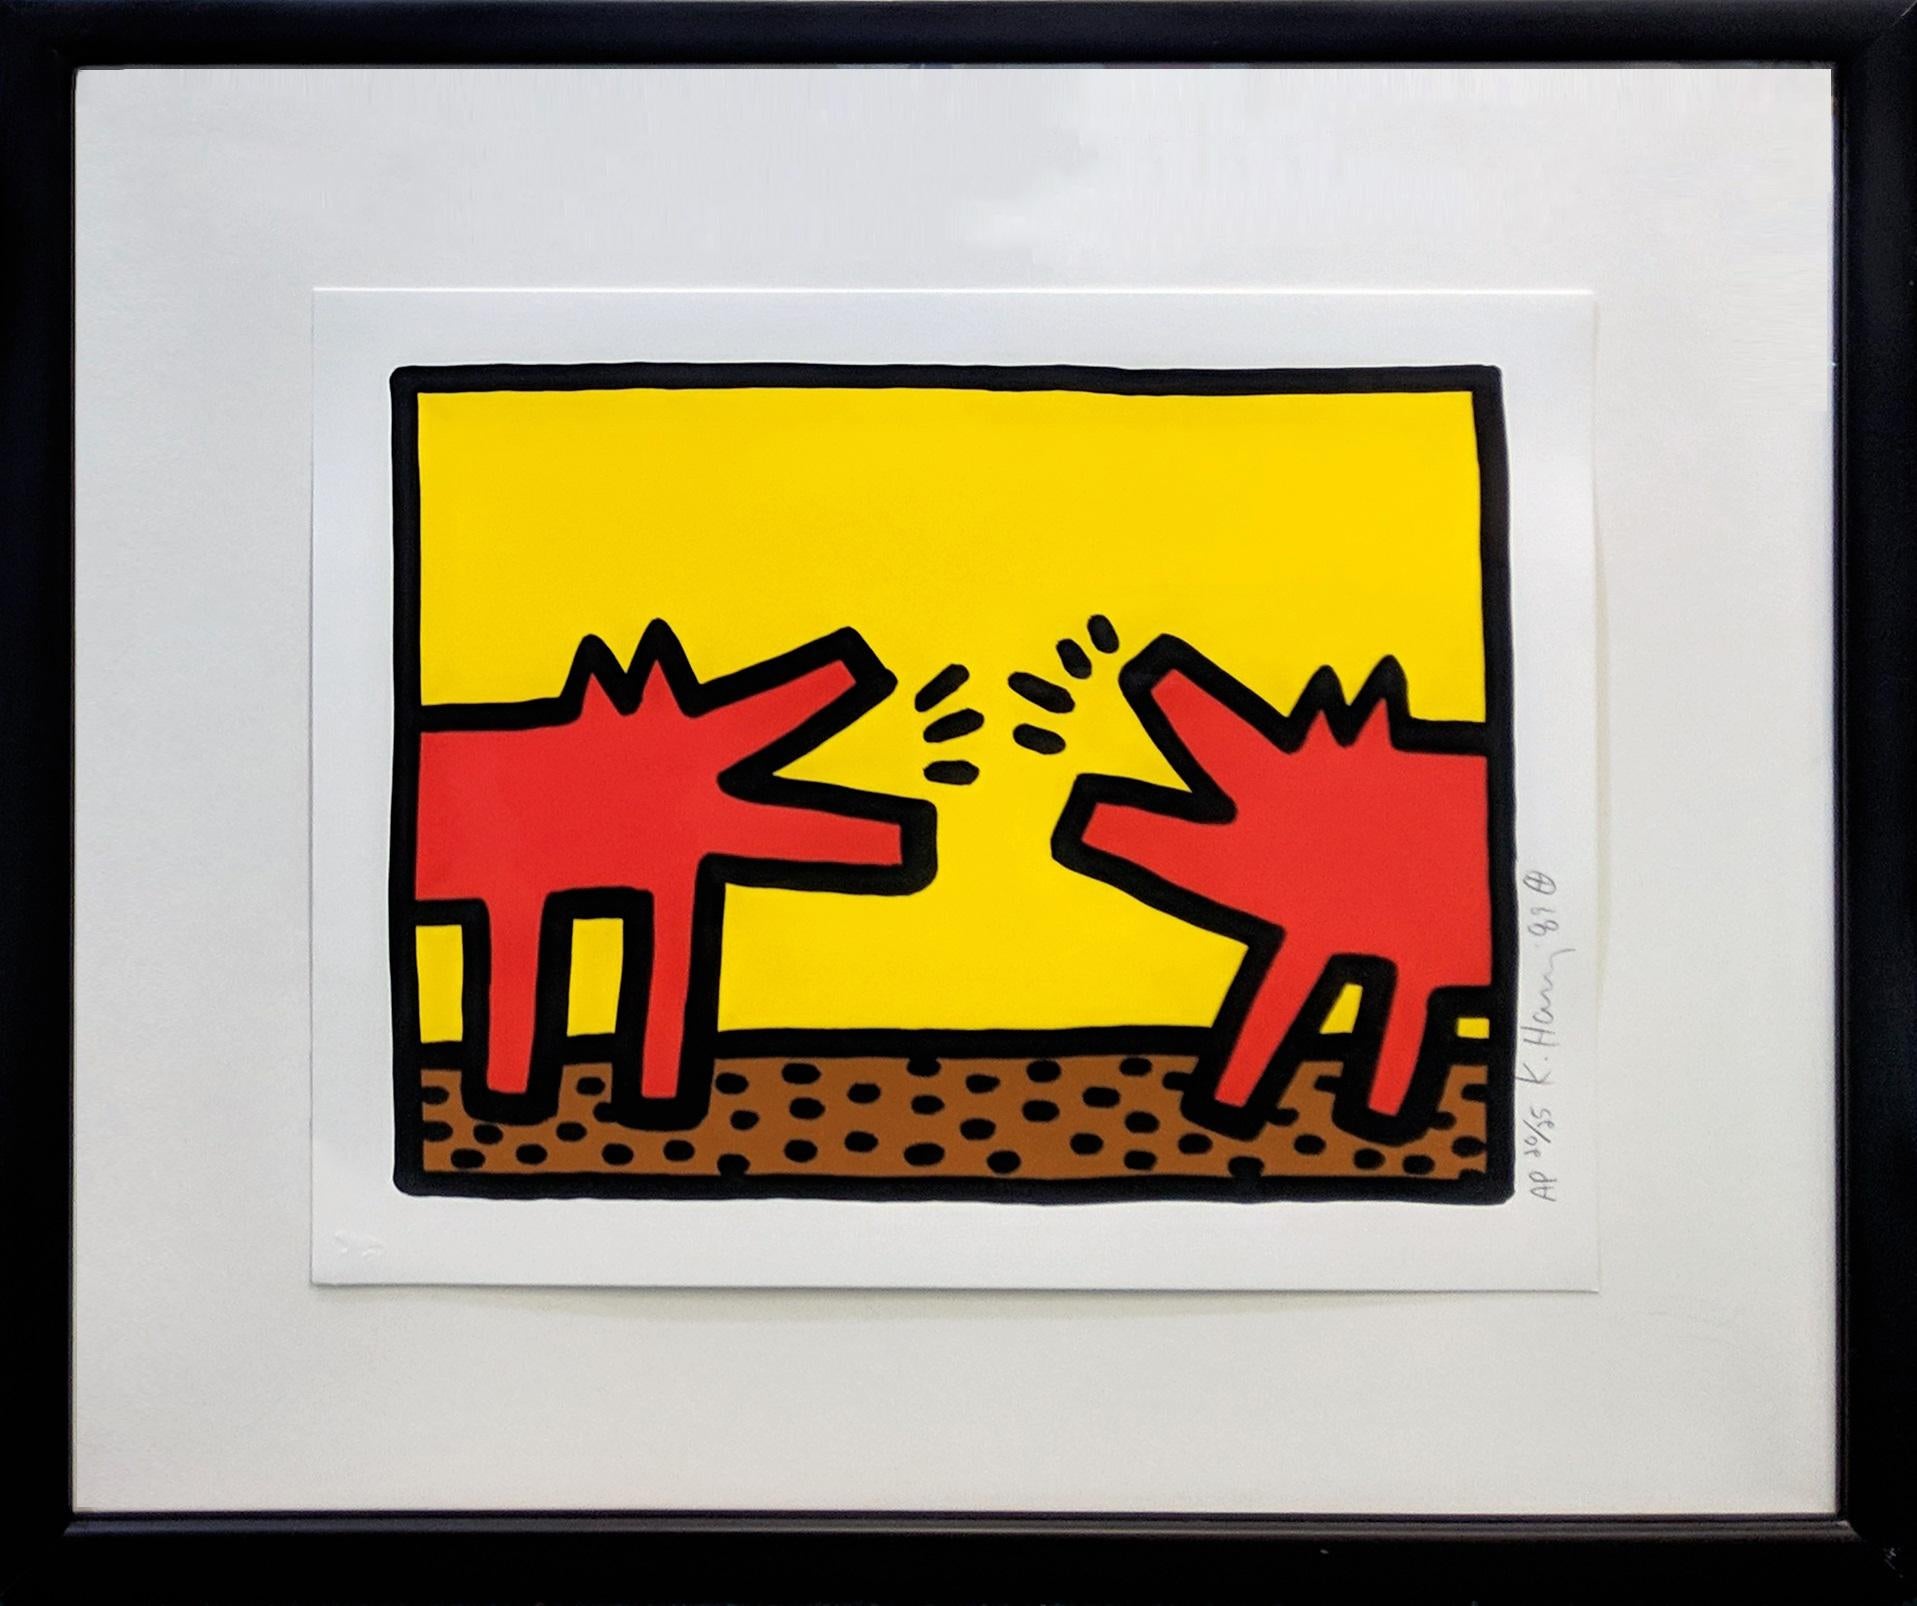 POP SHOP IV (2) - Print by Keith Haring